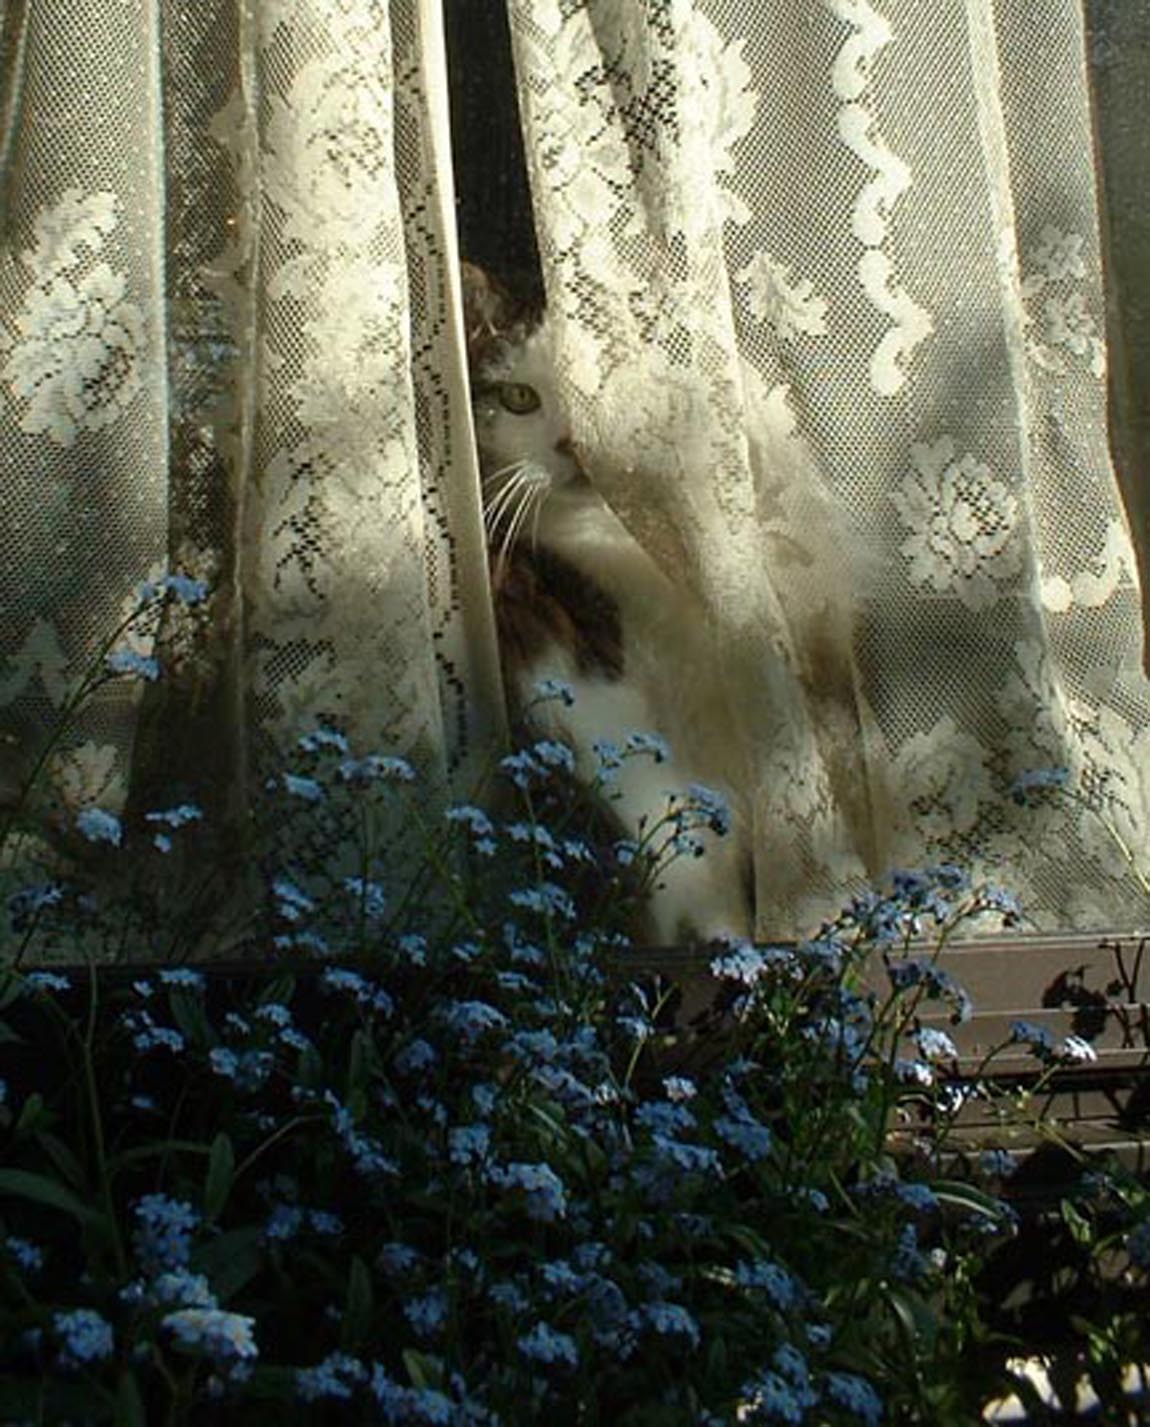 cat with forget me nots and lace curtain